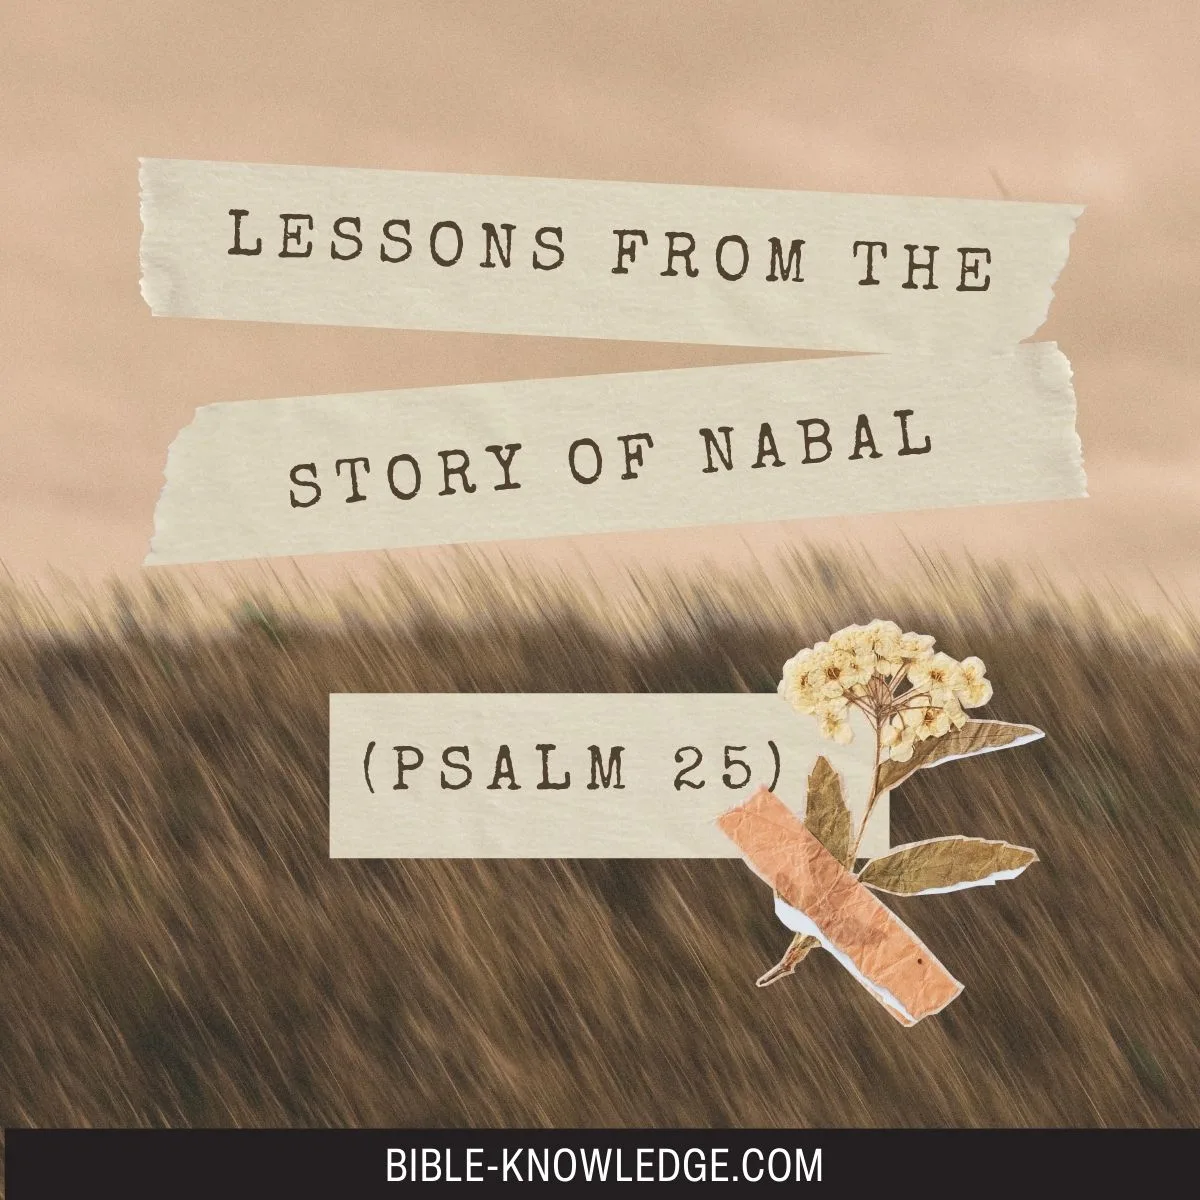 Lessons from the Story of Nabal